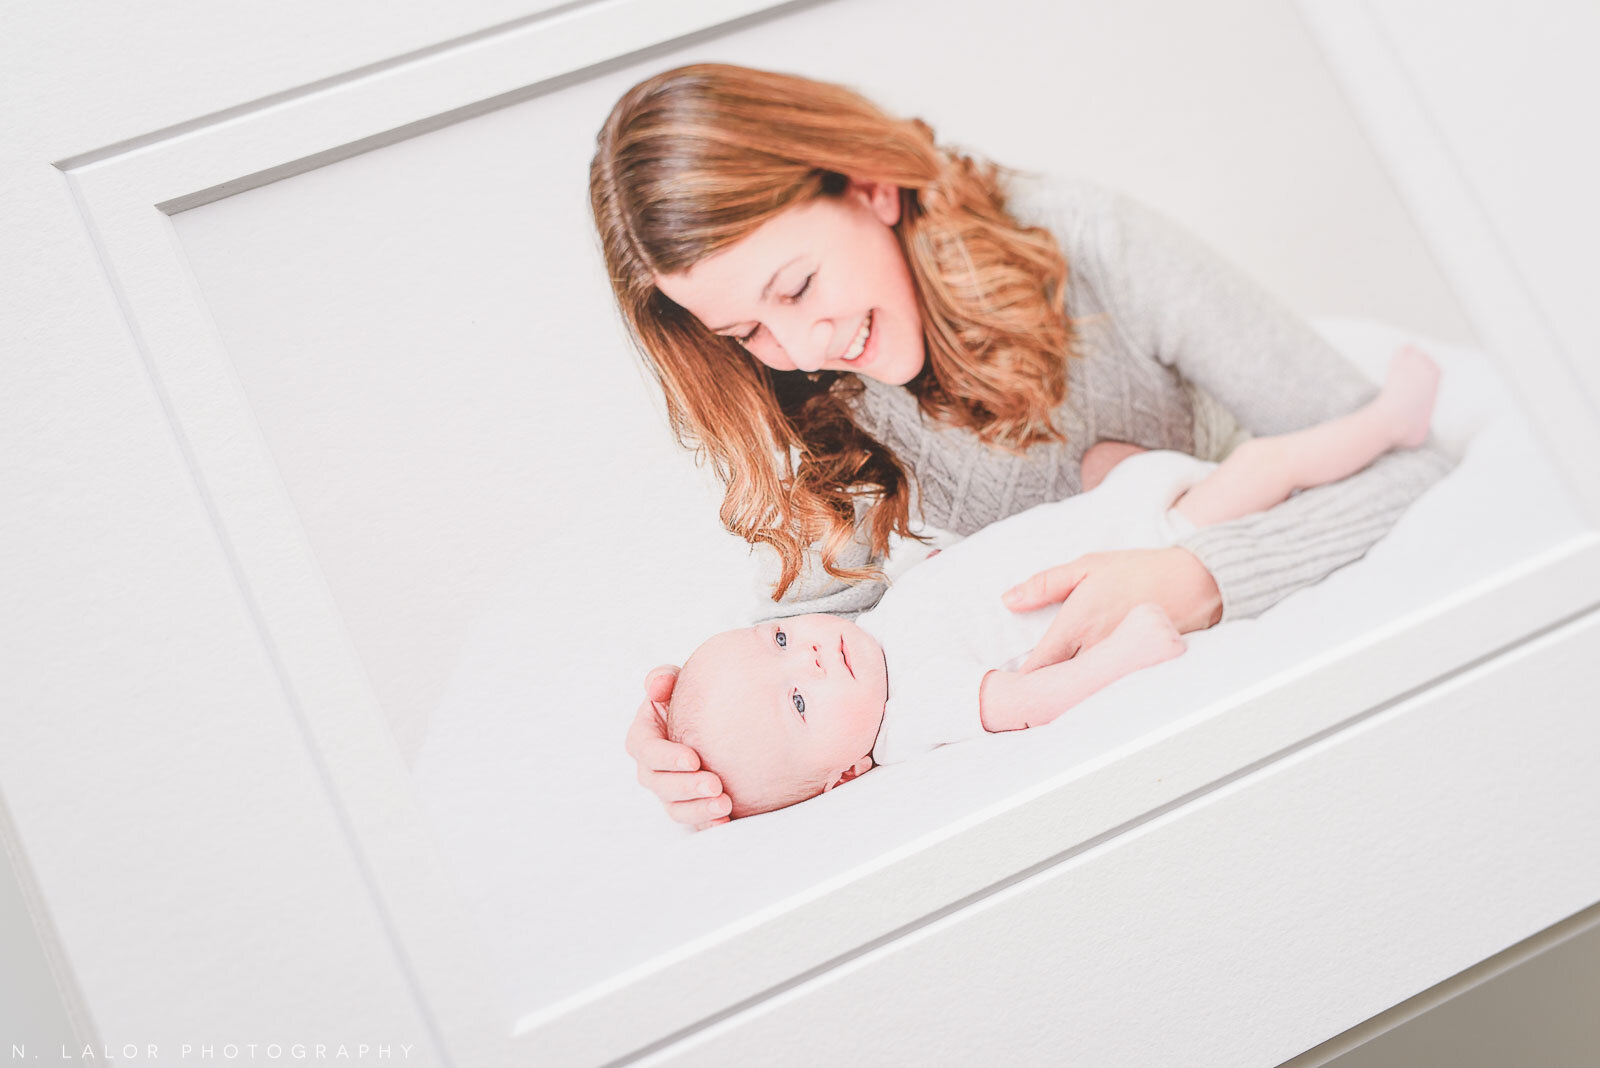 nlalor-photography-2018-twins-baby-photo-session-greenwich-connecticut-1.jpg